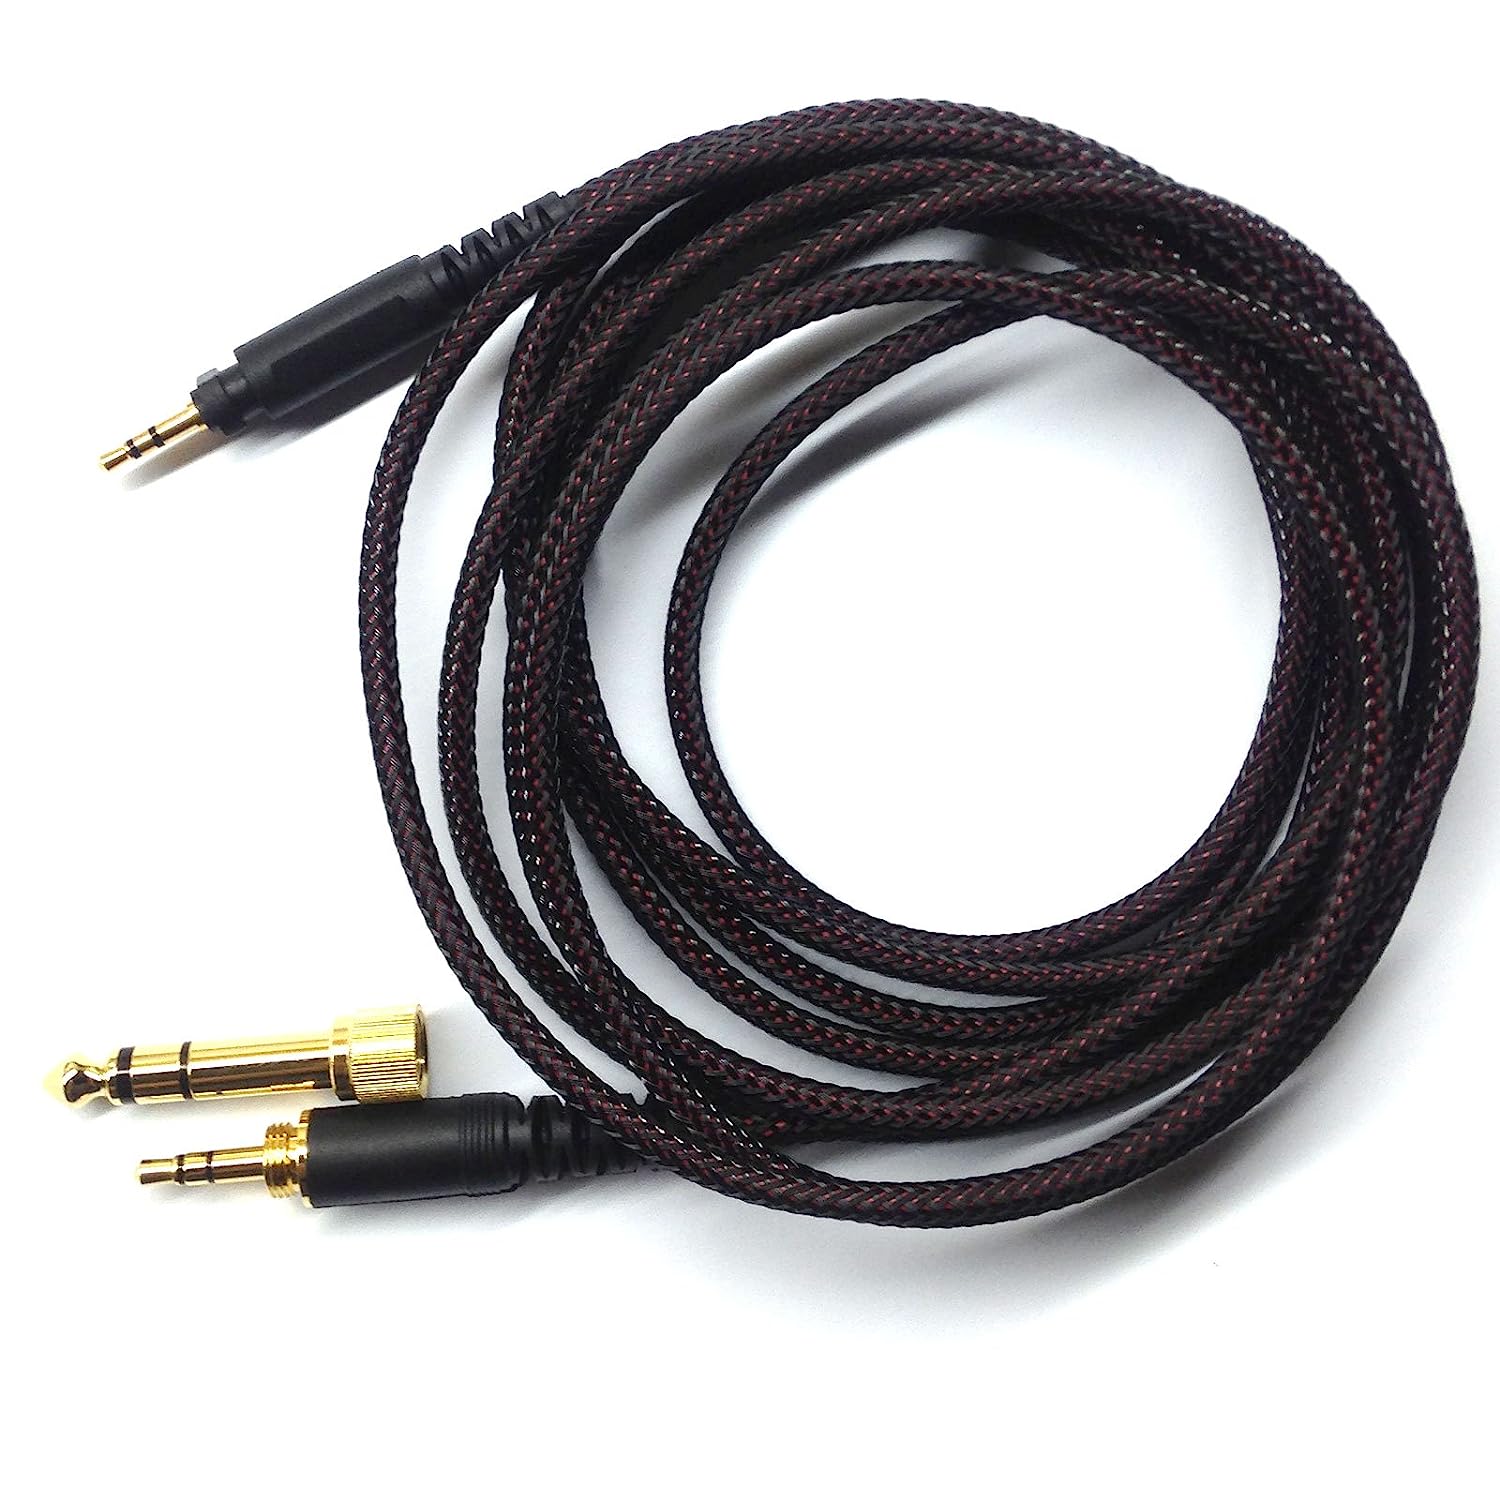 NEW NEOMUSICIA Replacement Cable for SHURE SRH840 [...]